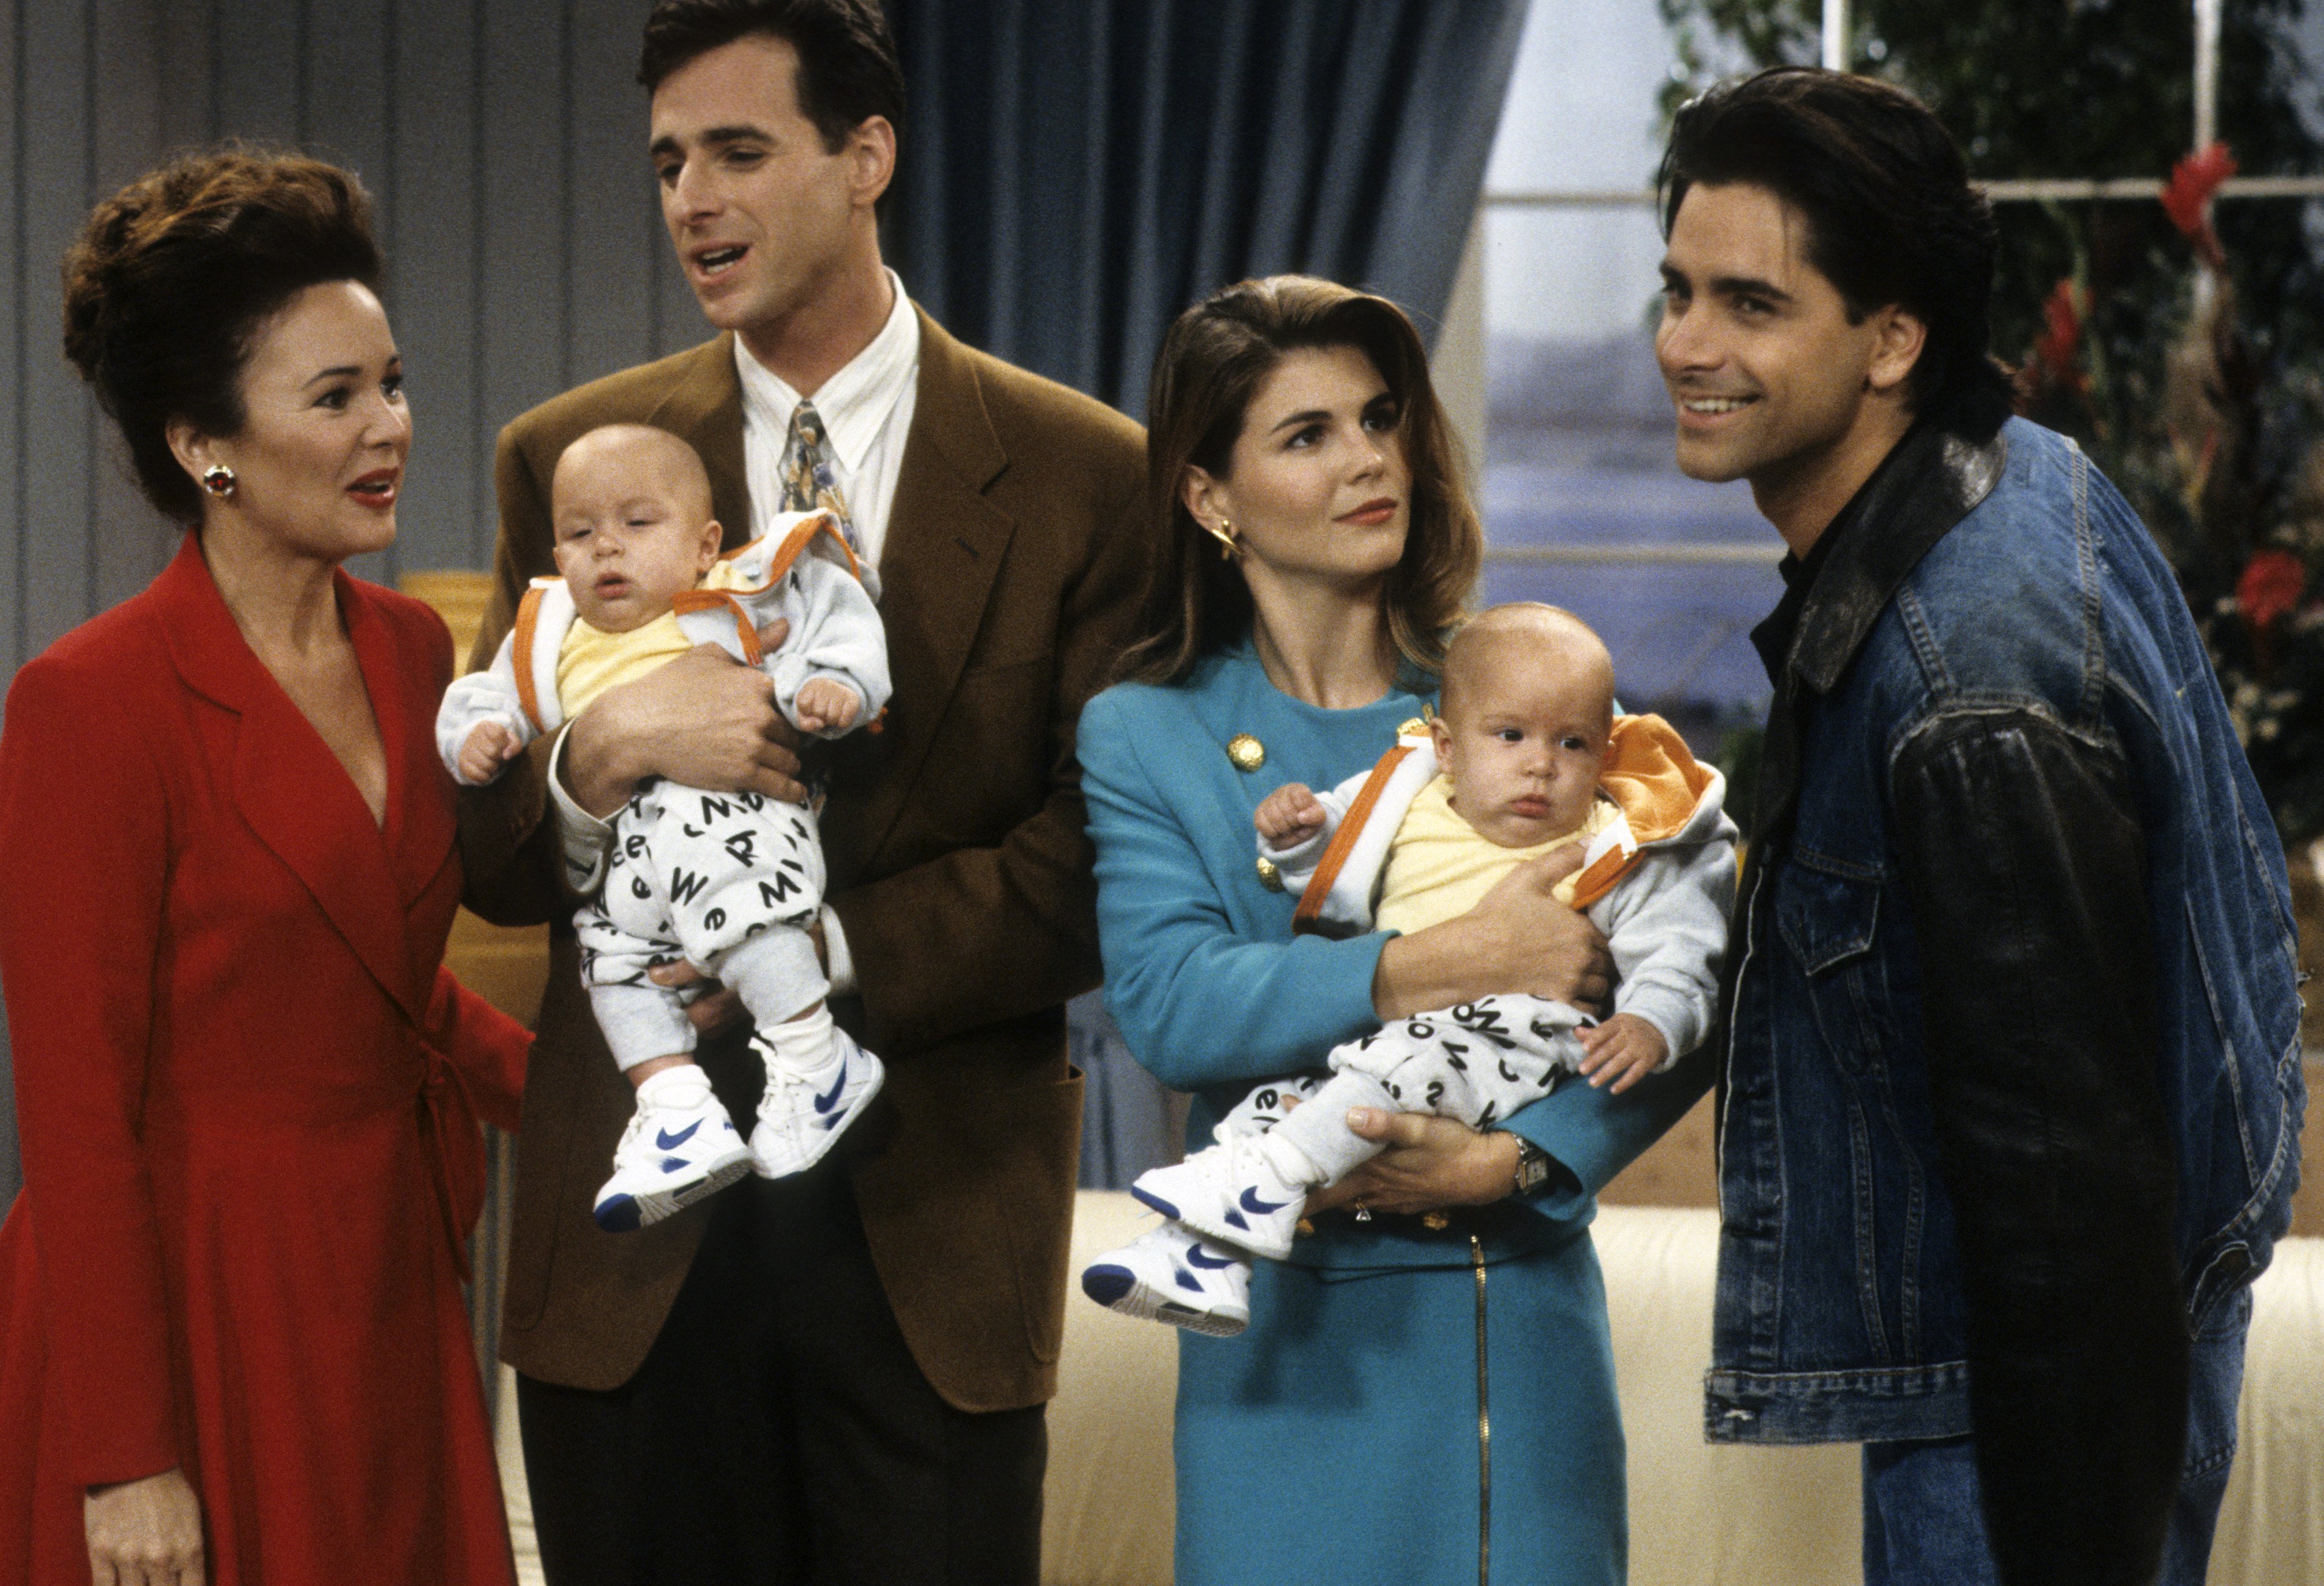 'Full House' Episode Titled 'Play It Again, Jess' with actors Bob Saget and John Stamos